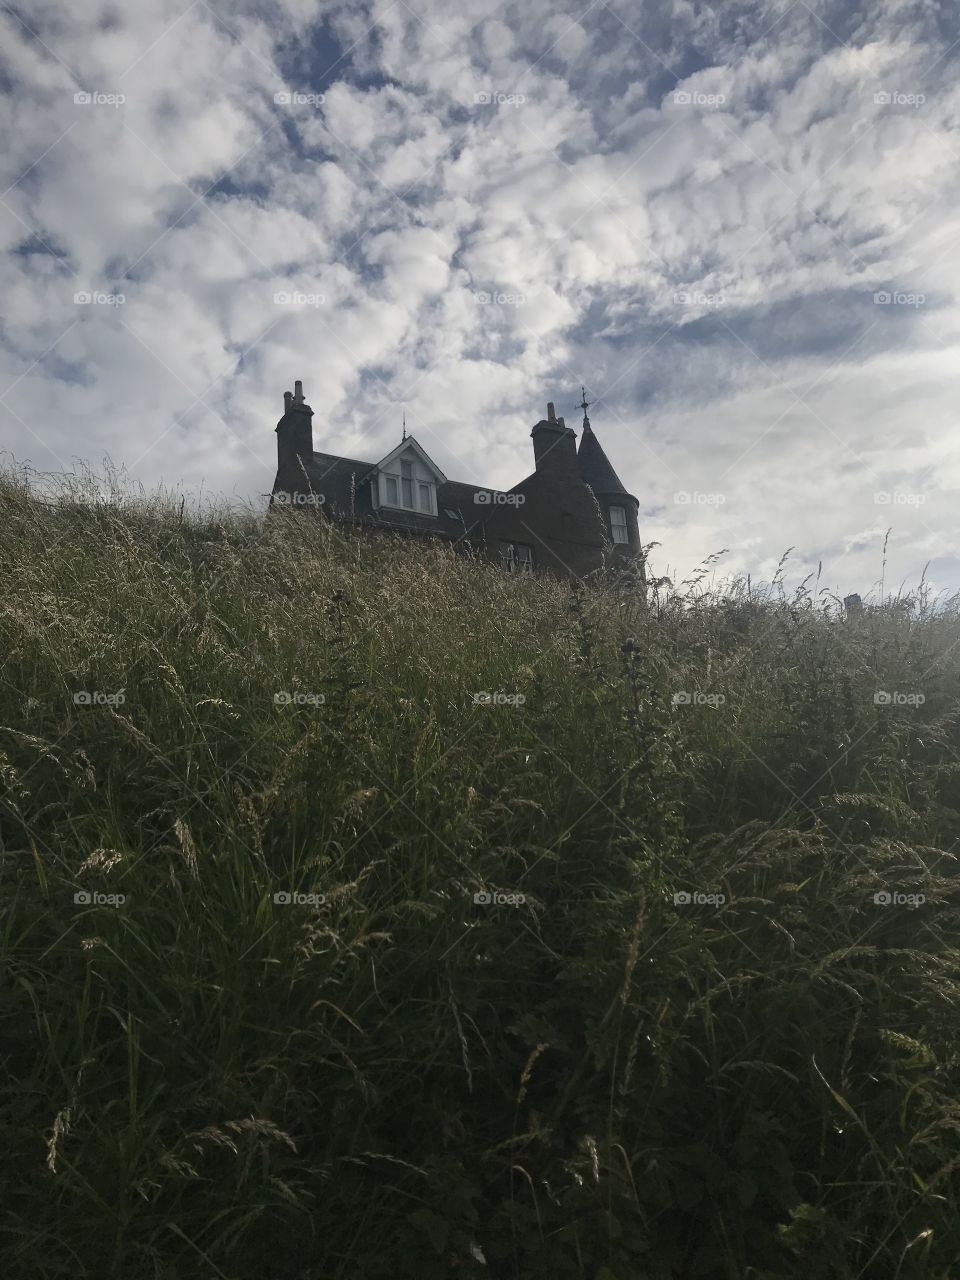 House on a hill in St. Andrews Scotland 